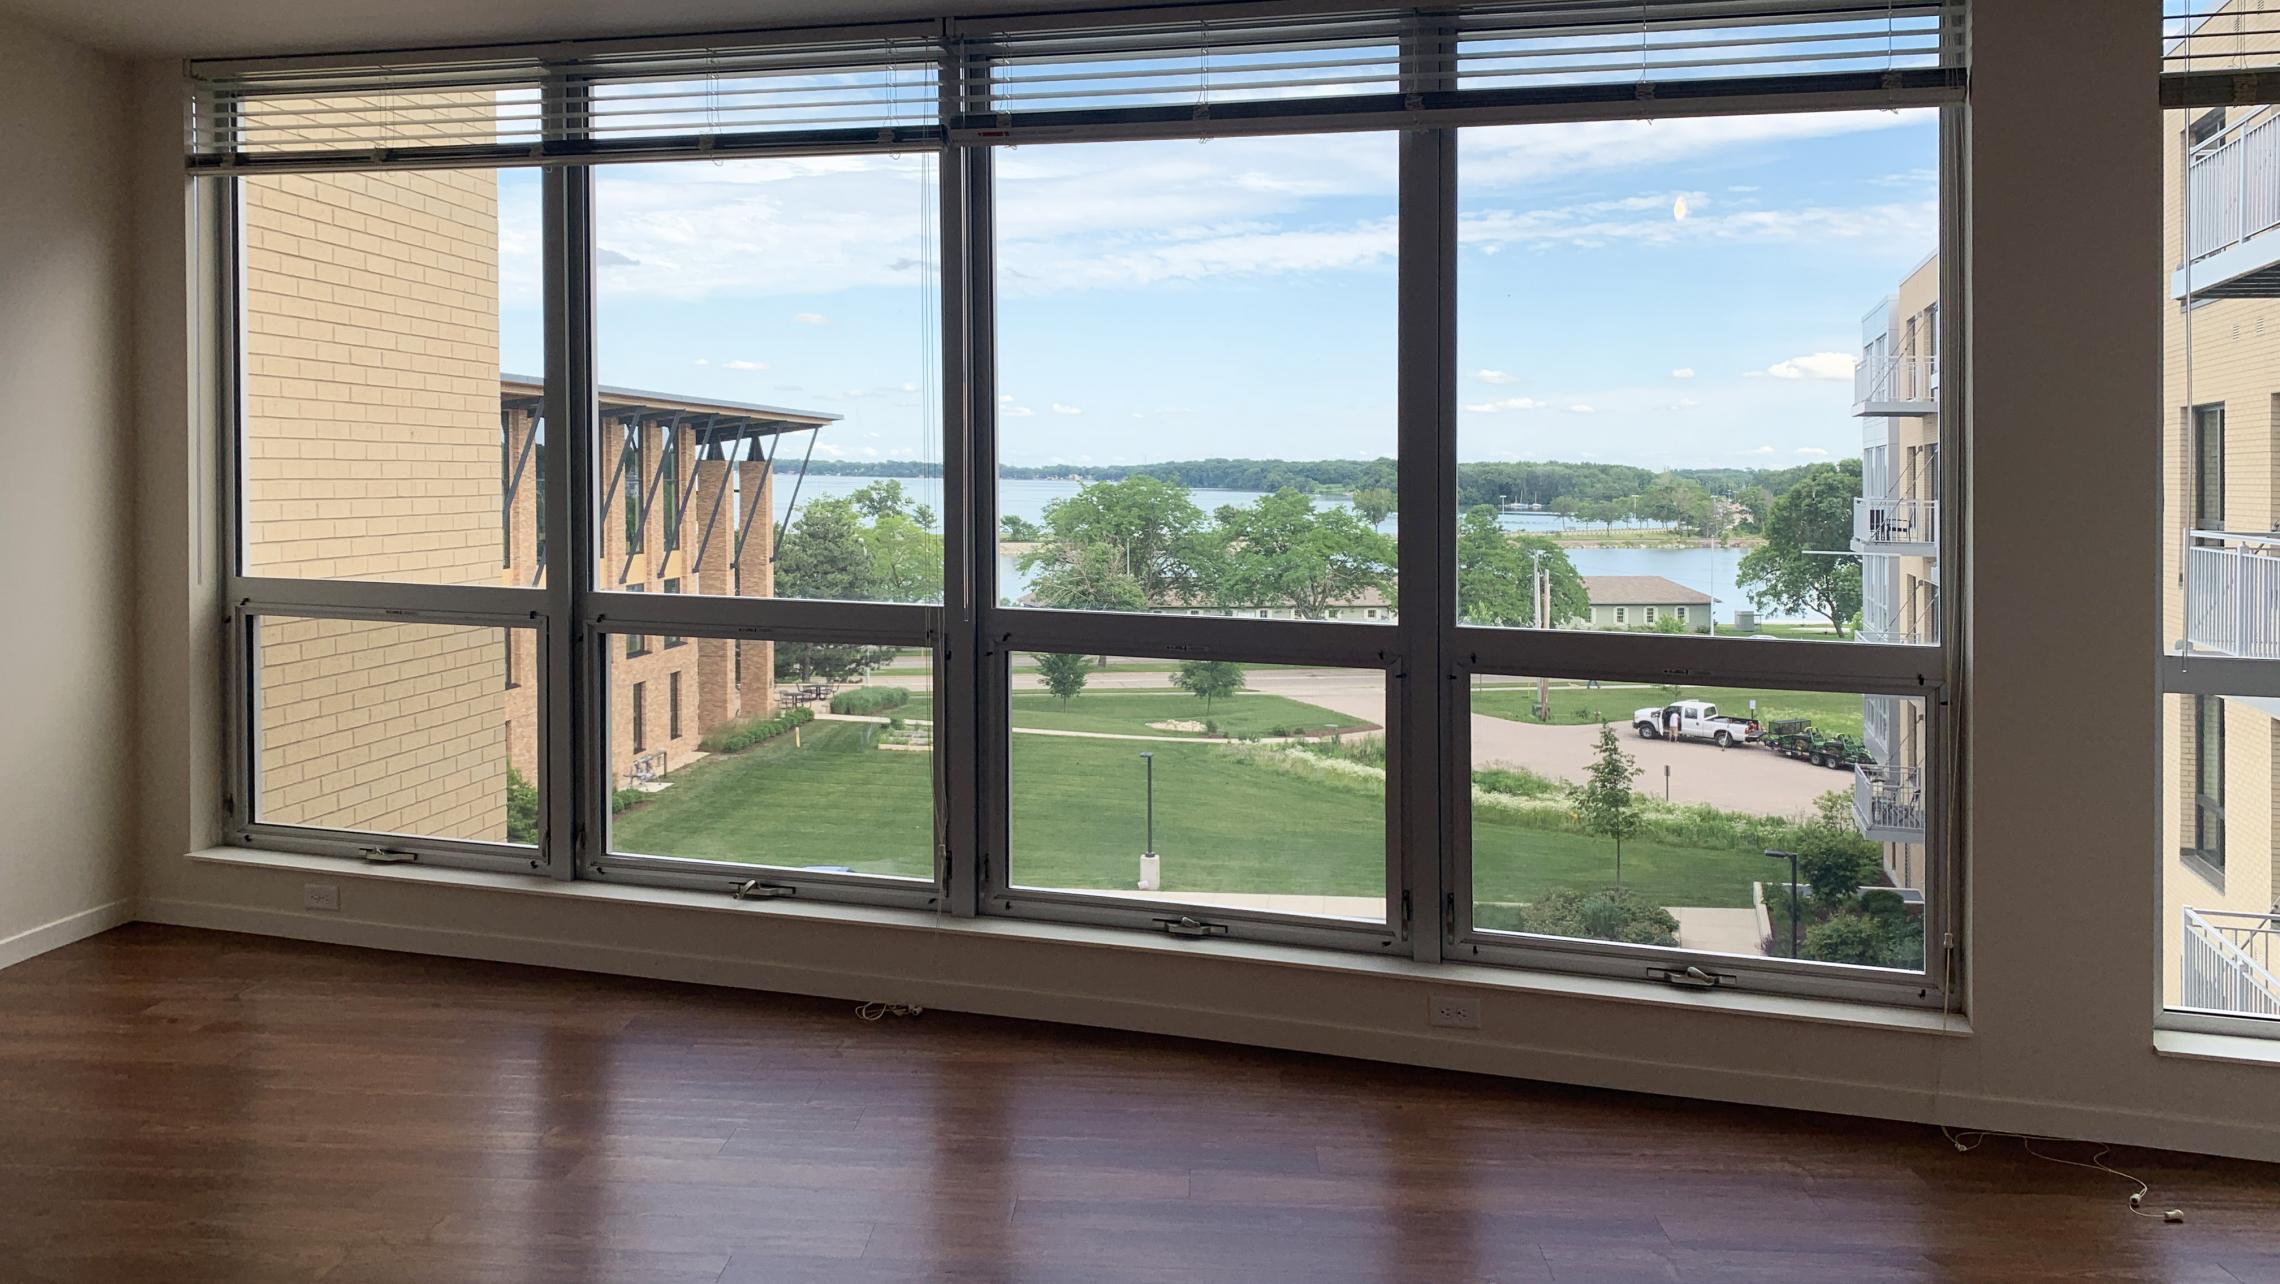 Nine-Line-at-The-Yards-Apartment-409-One-Bedroom-Lake-View-Natural-Light-Sunny-Modern-Upscale-Designe-Luxury-Luxurious-Balcony-Views-Fitness-Lounge-Courtyard-Dogs-Cats-Bike-Trail-Downtown-Capitol